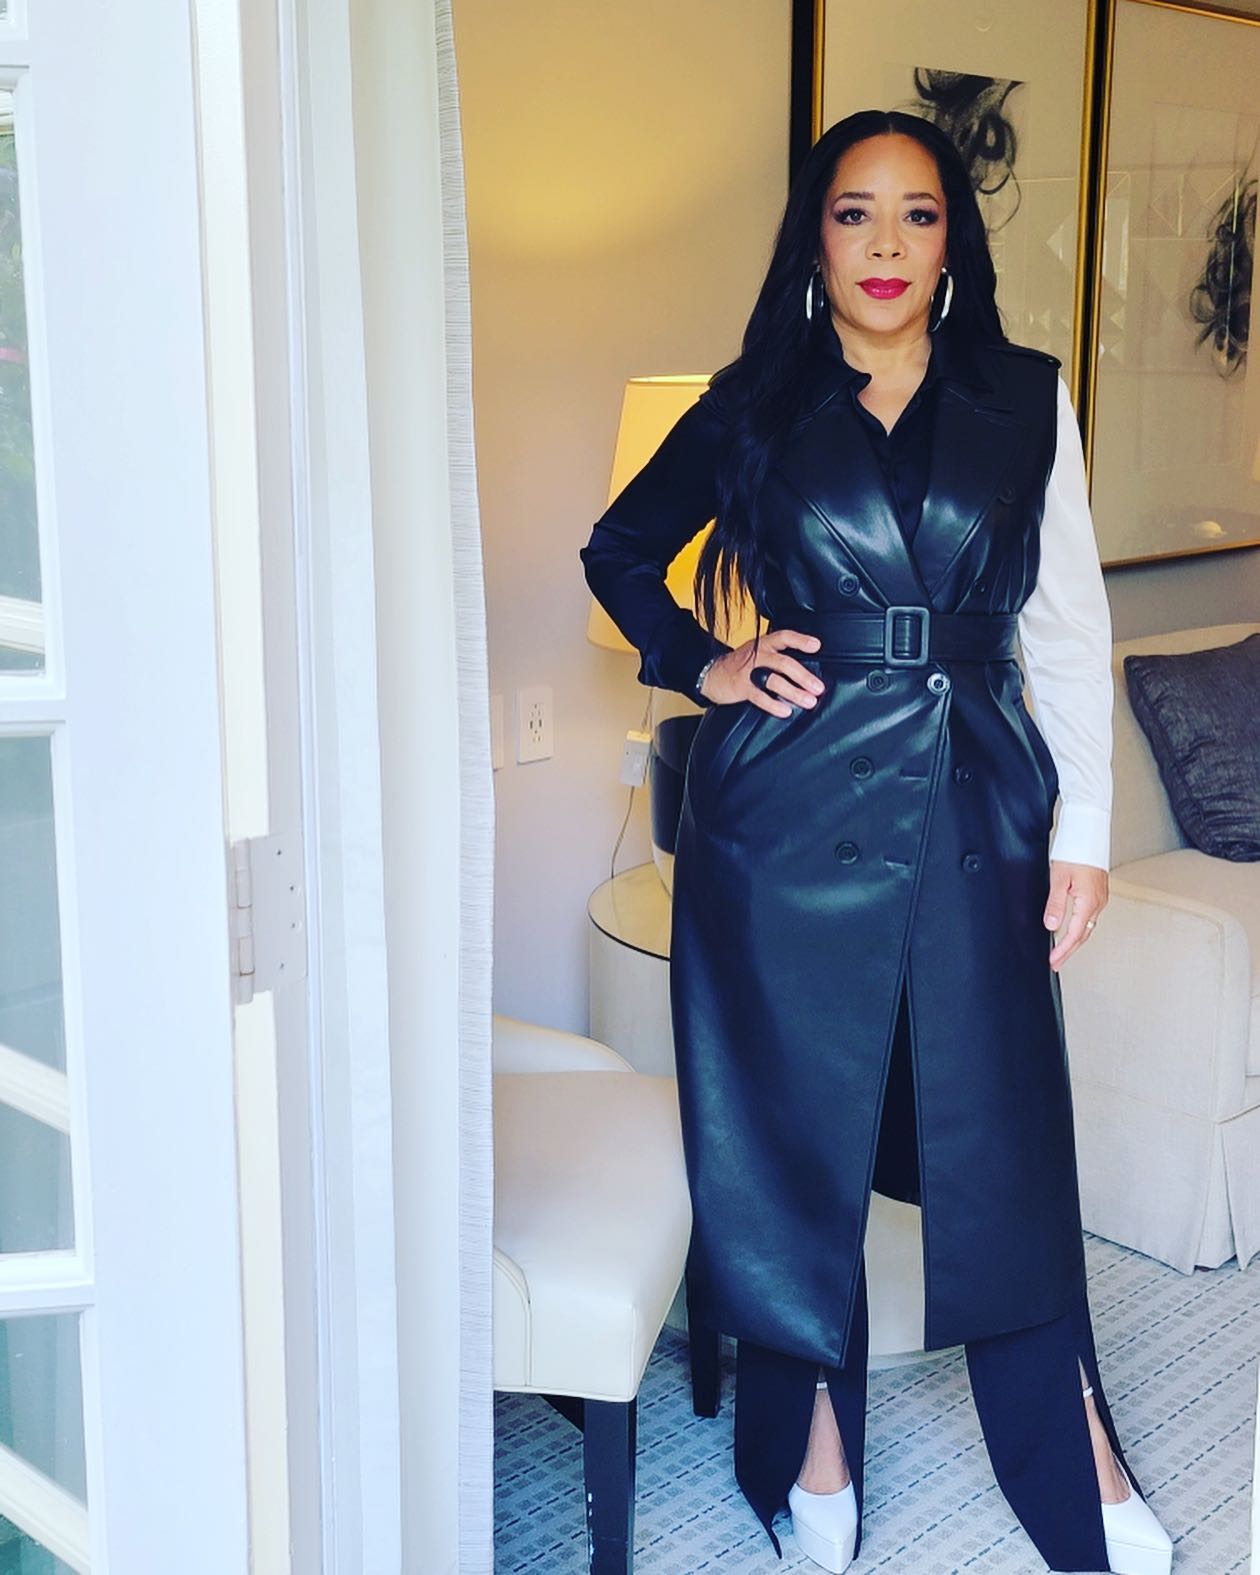 Selenis Leyva as seen in a black dress on the press day of 'Creed III'